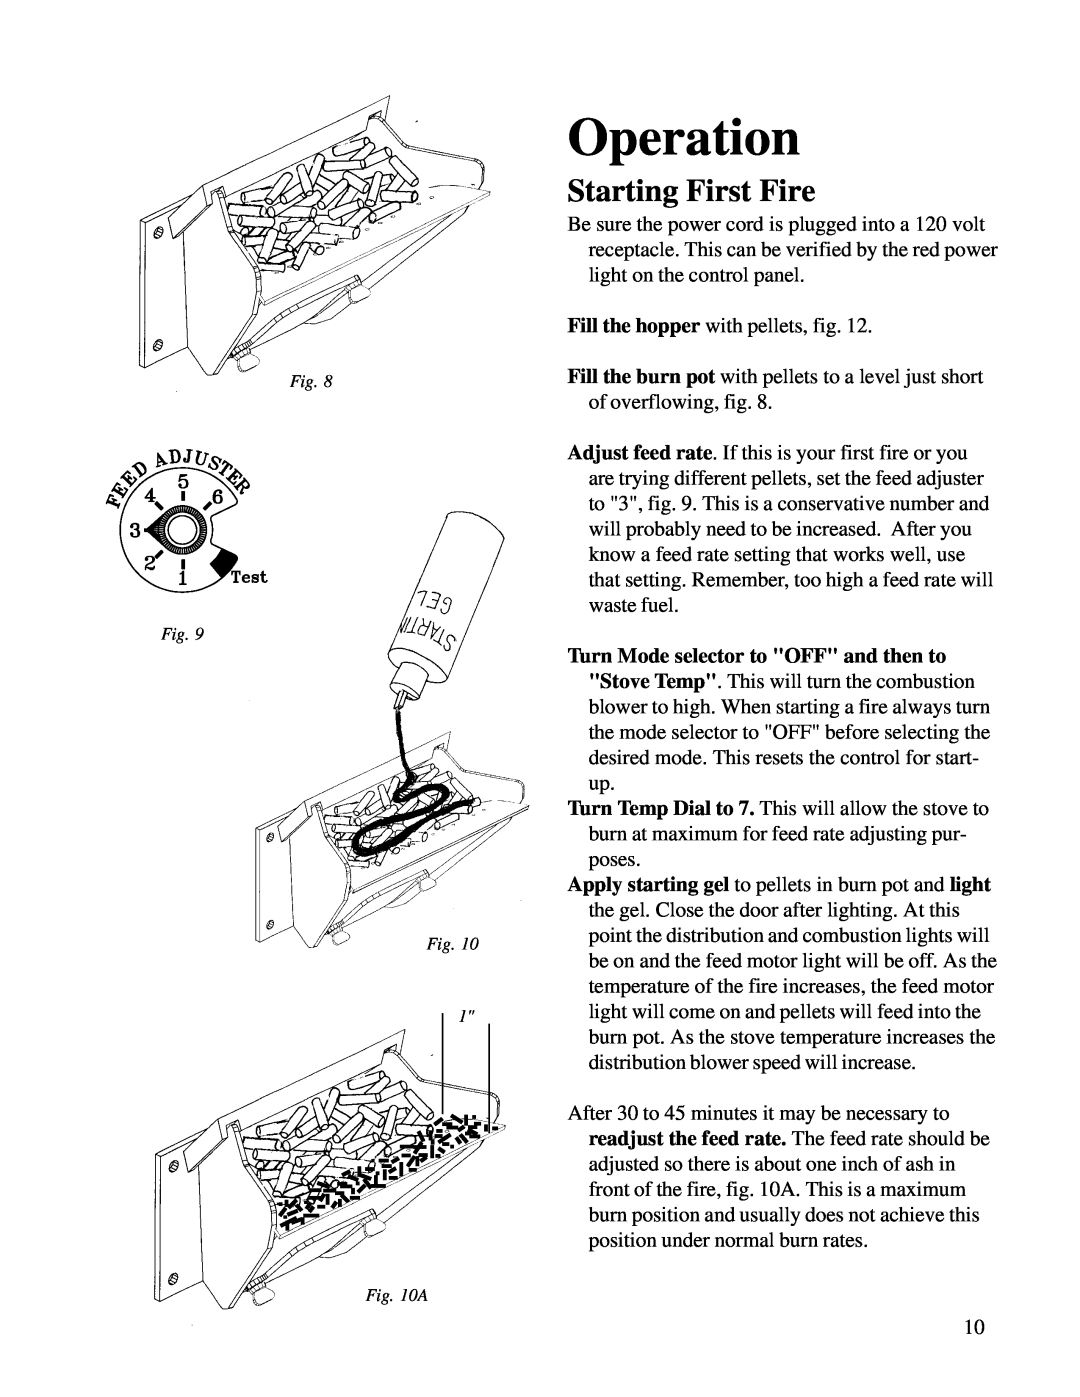 Harman Stove Company R6 owner manual Operation, Starting First Fire 